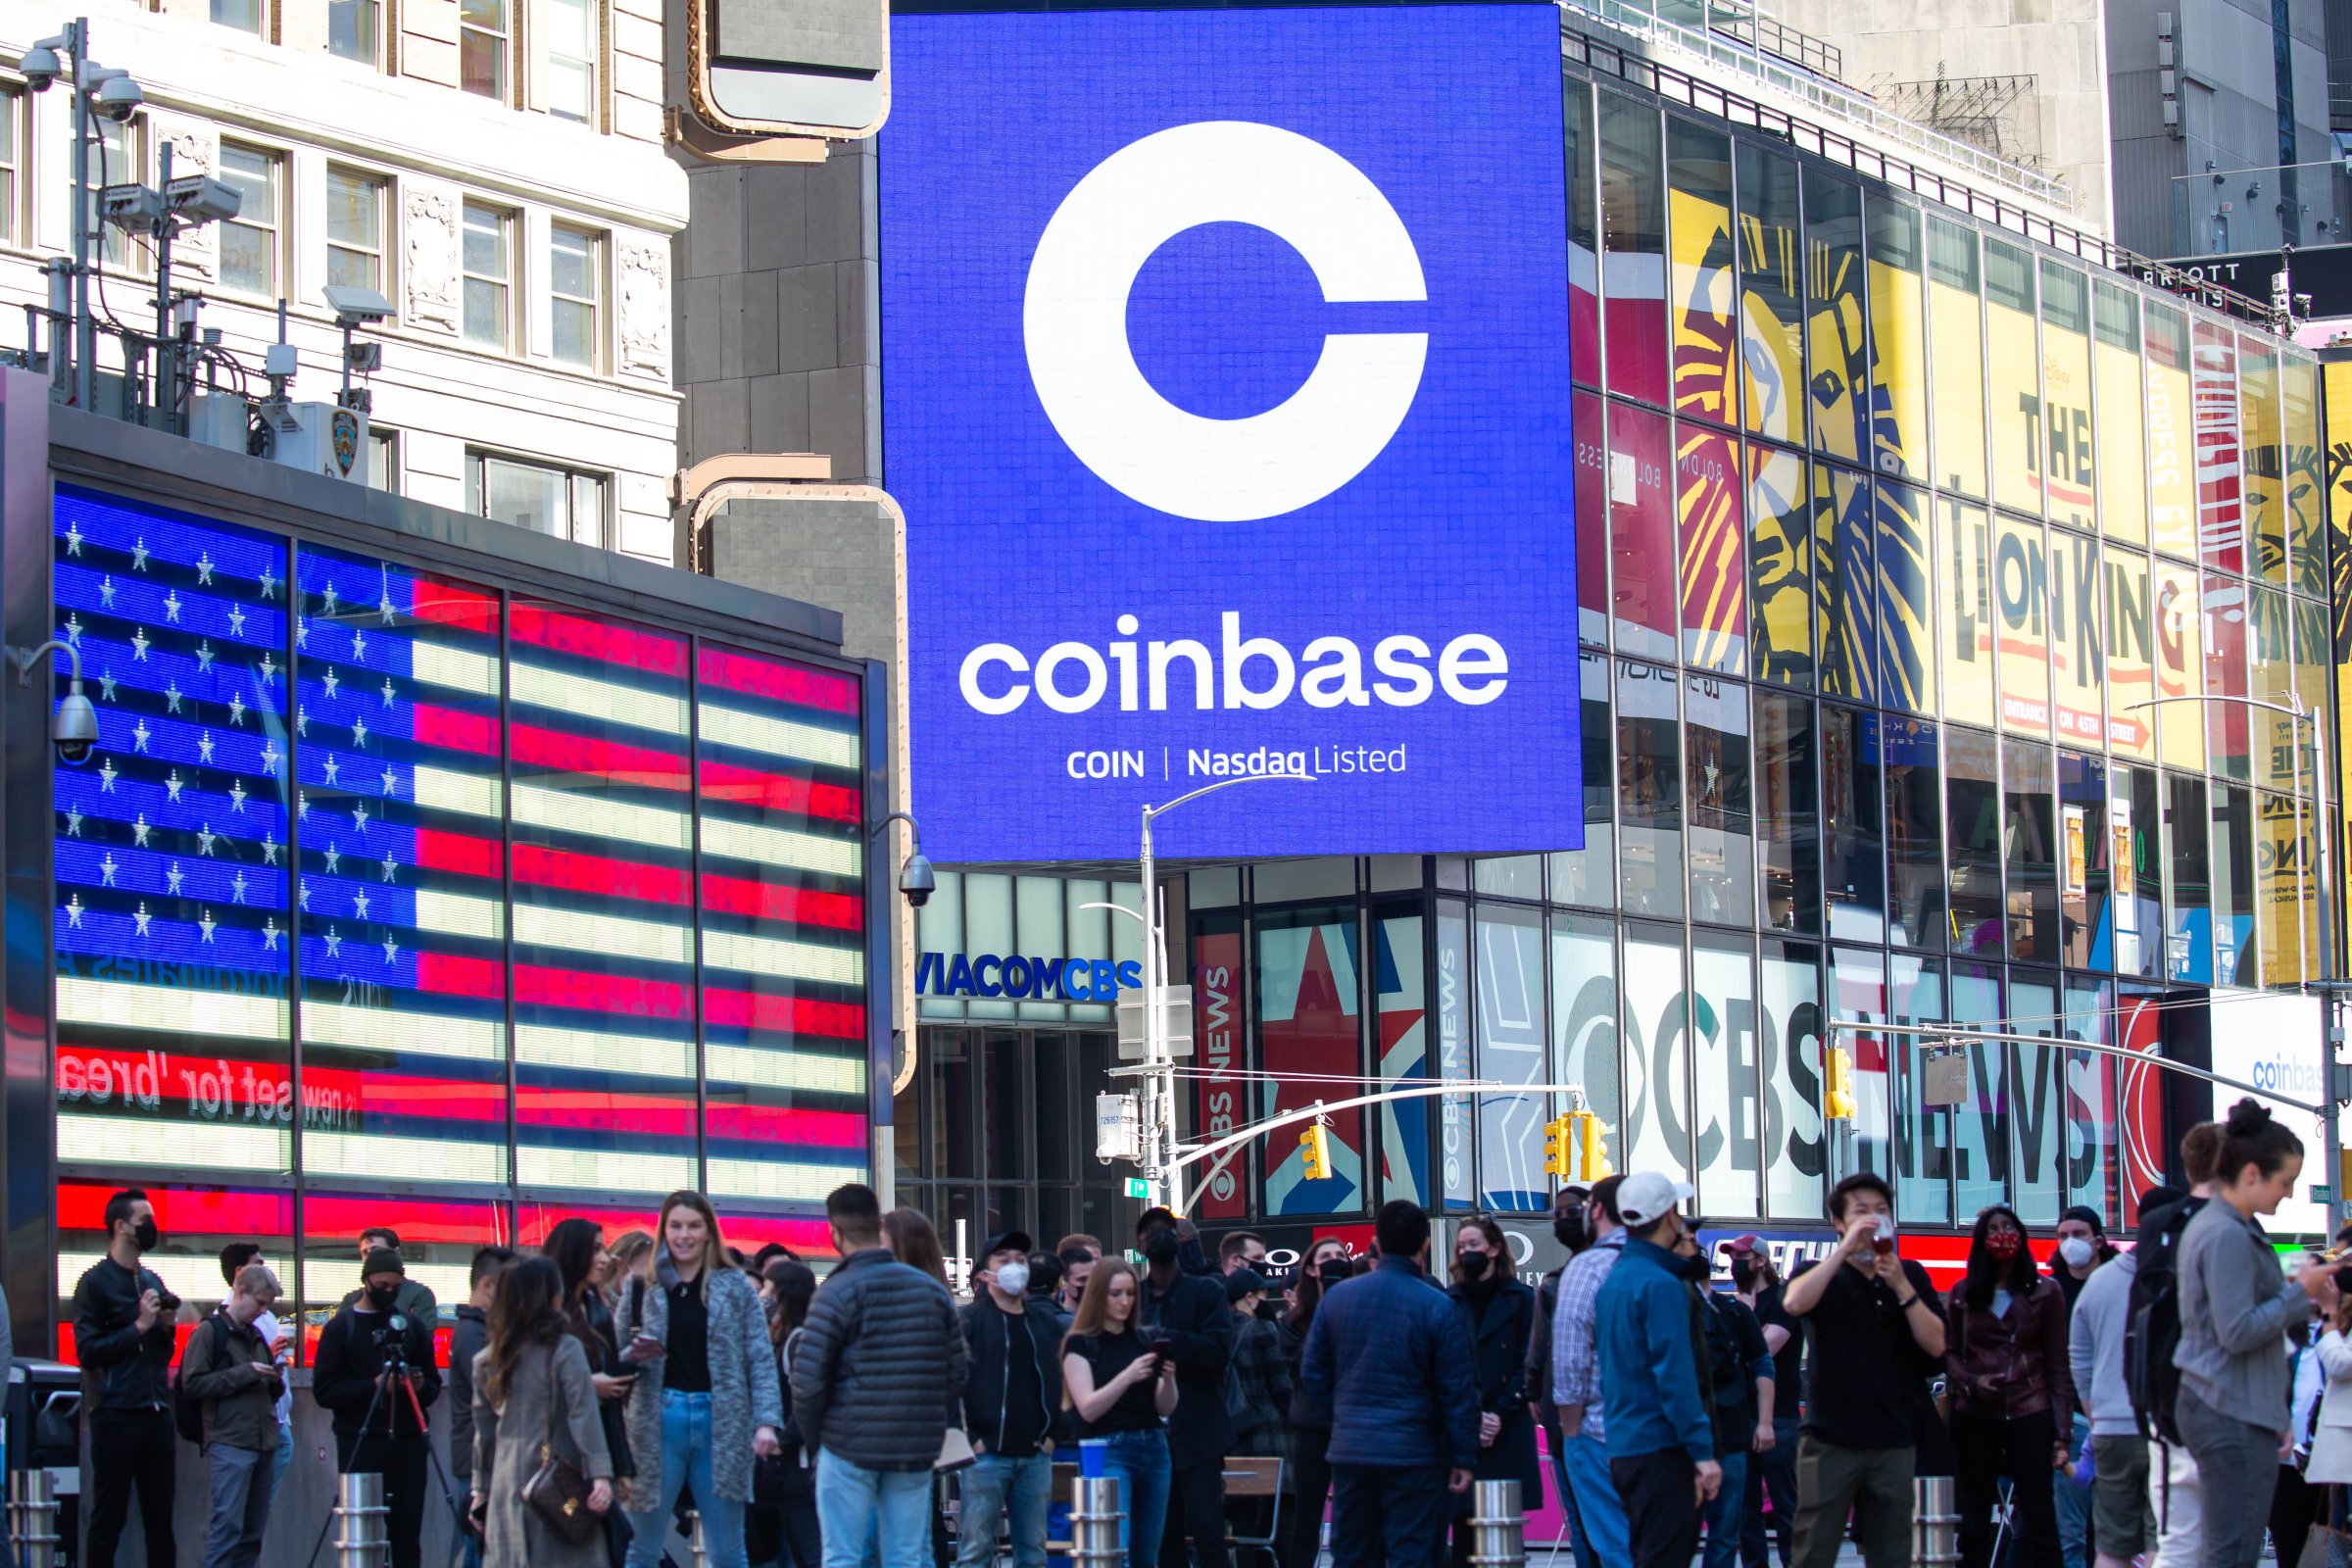 Monitors display Coinbase signage during the company's initial public offering (IPO) at the Nasdaq MarketSite in New York, on April 14, 2021.